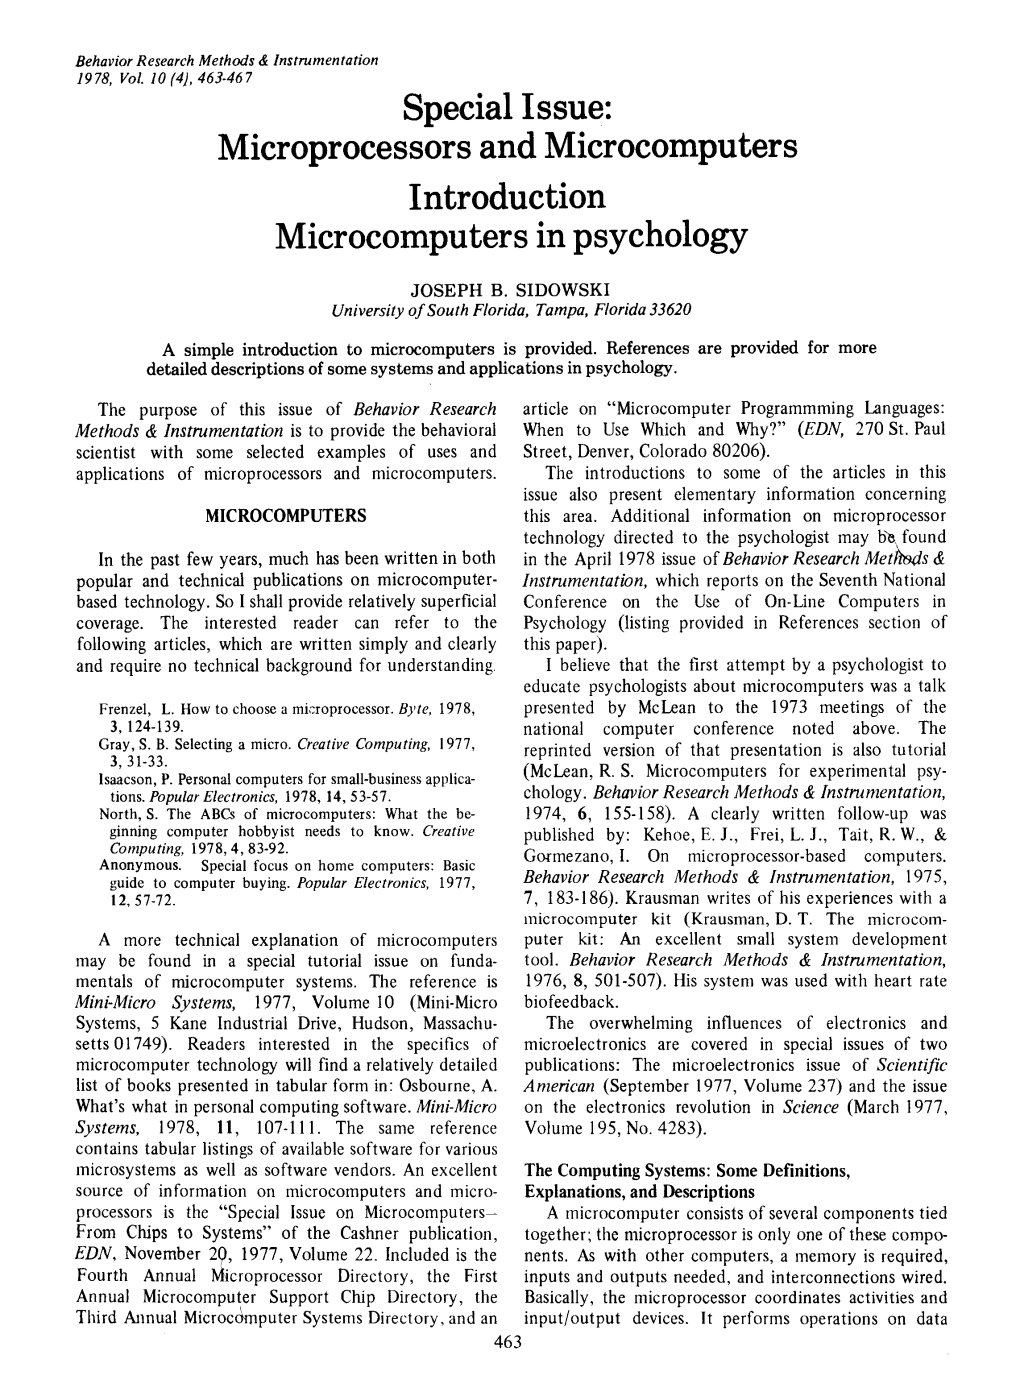 Introduction Microcomputers in Psychology